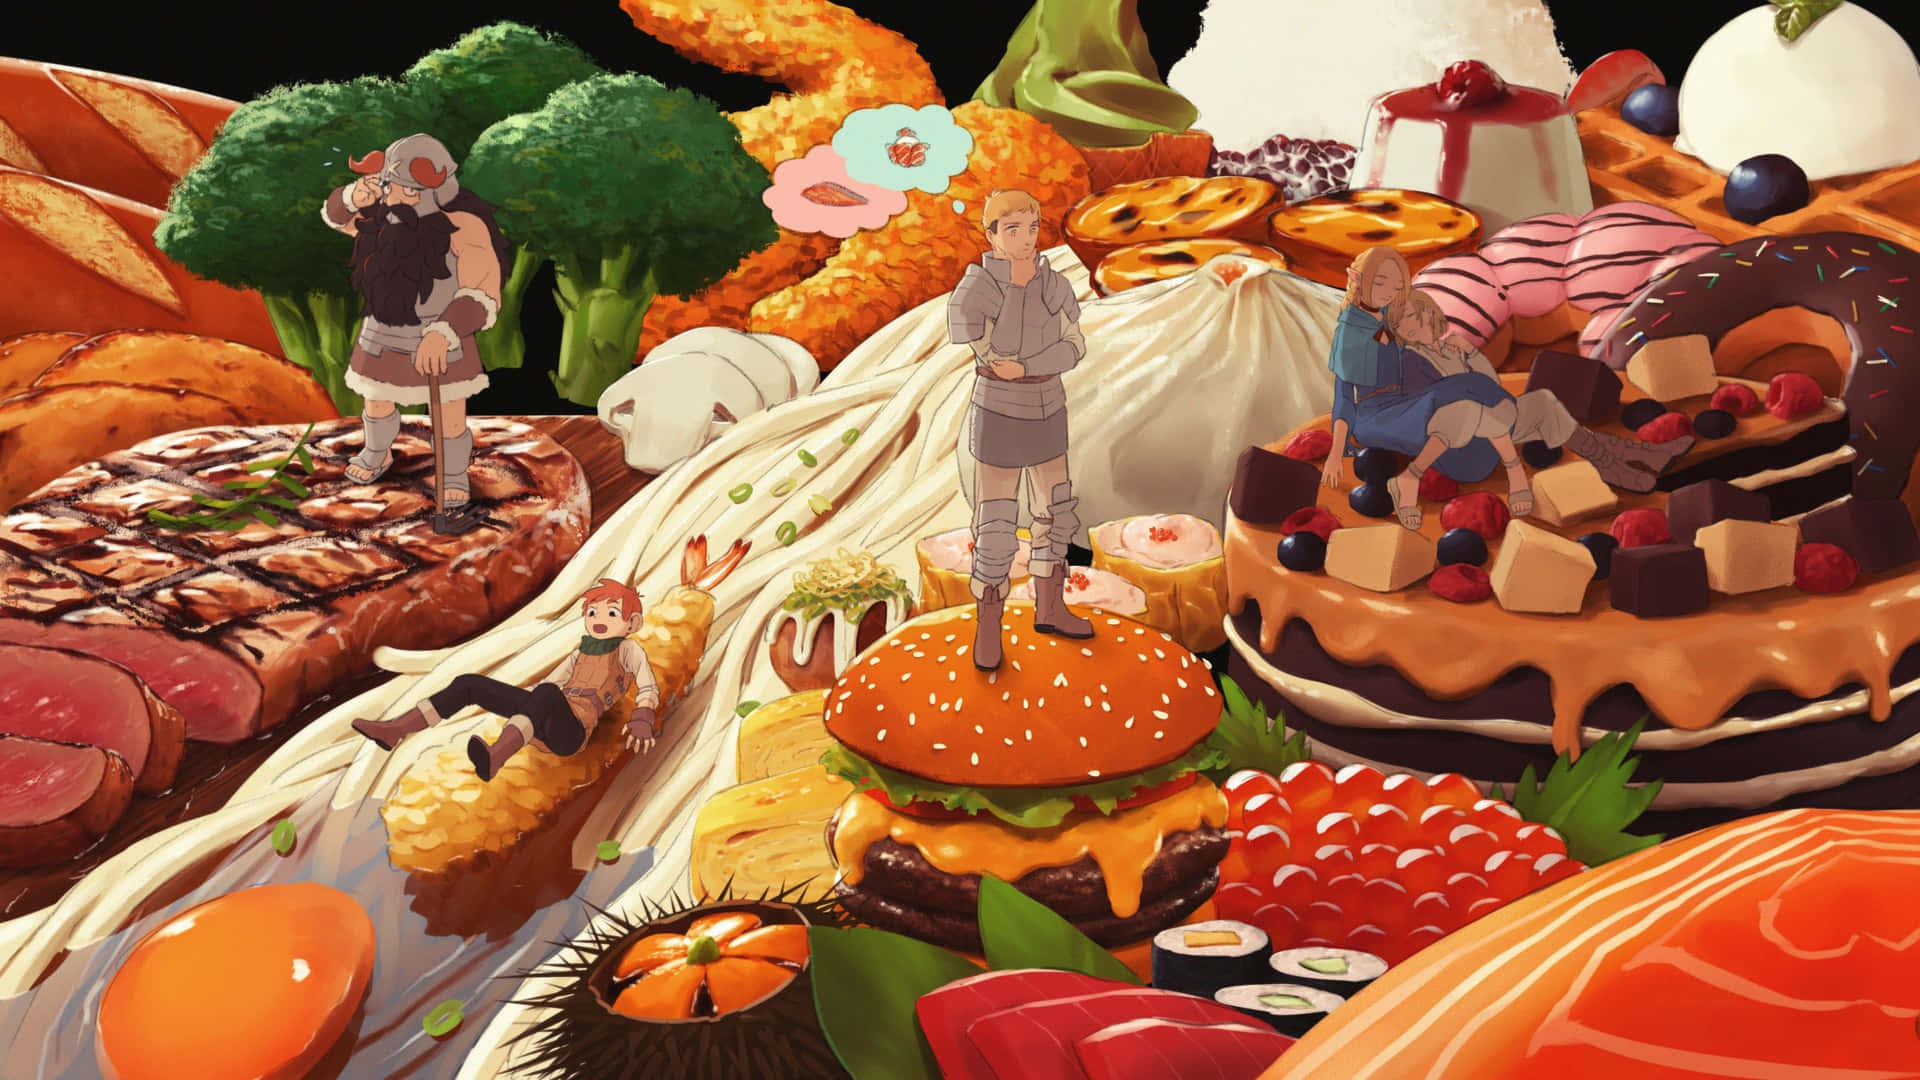 Thanksgiving with a twist - Celebrate with your favorite Anime characters! Wallpaper